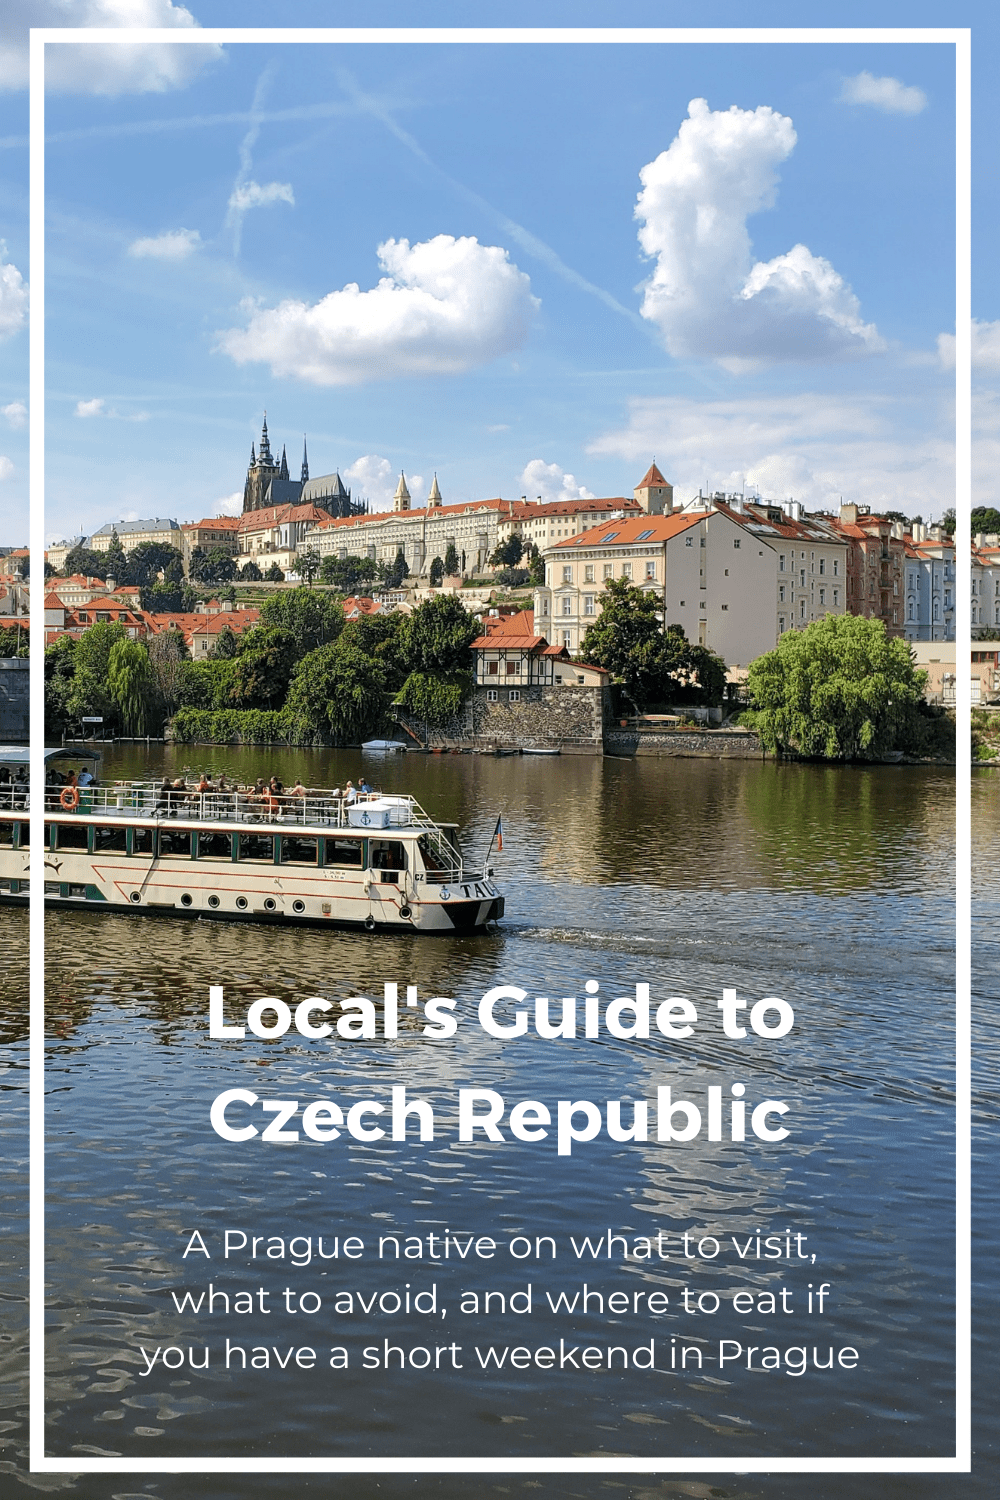 A photo of the Vltava River and Prague Castle in the background as part of a local's guide to Czech Republic